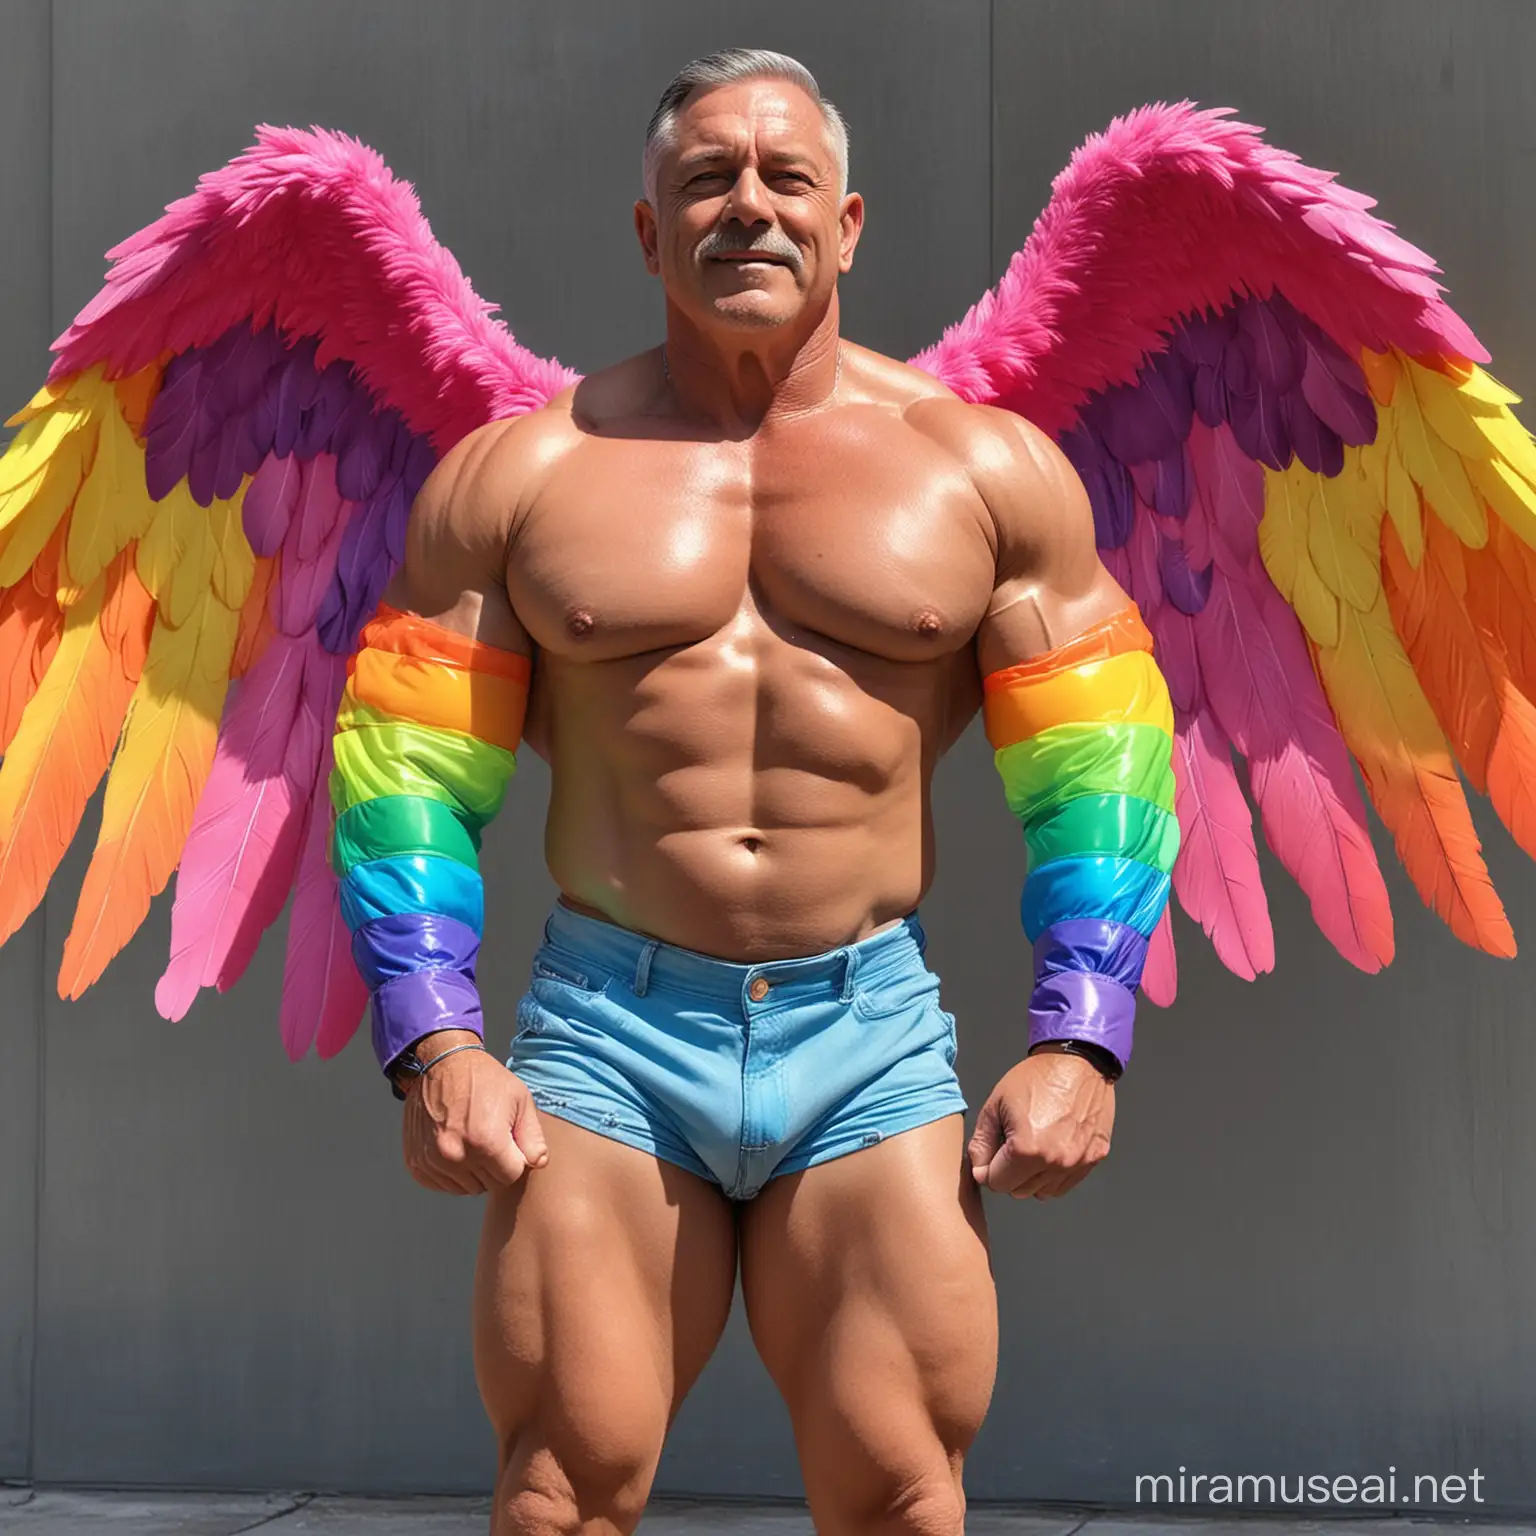 Muscular Bodybuilder Flexing with Colorful Eagle Wings Jacket and Doraemon